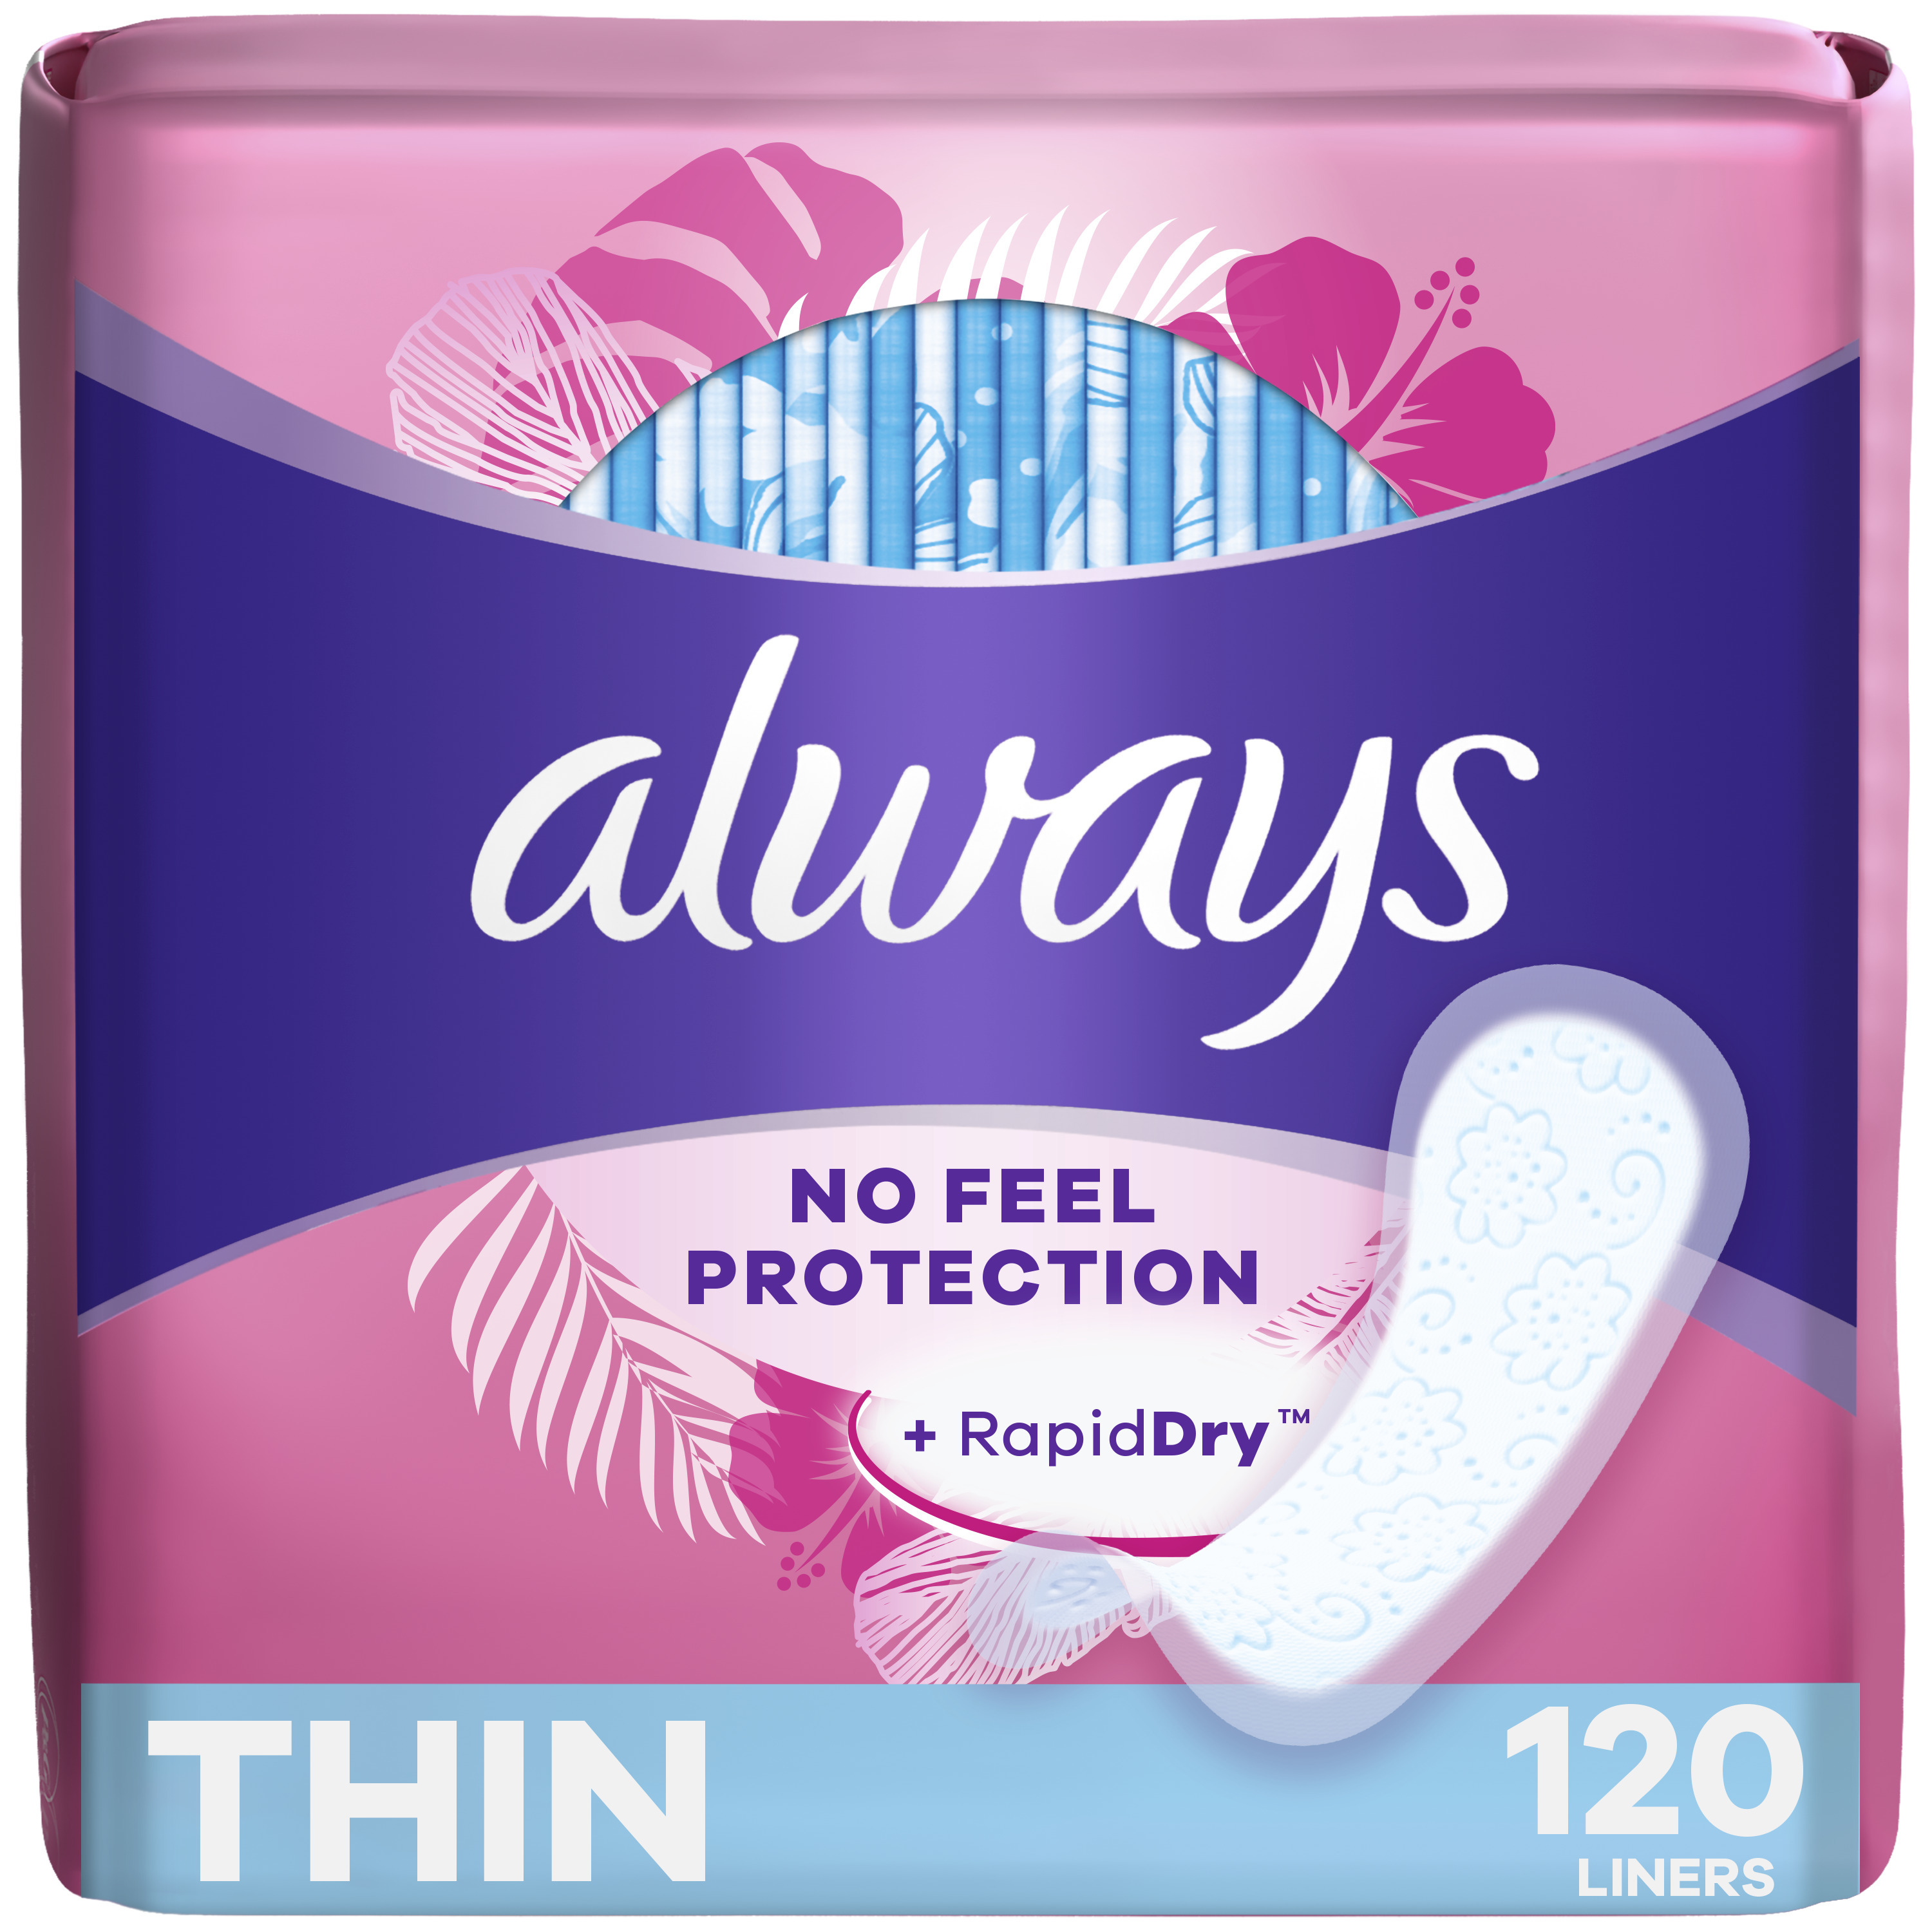 Always Thin No Feel Protection Daily Liners, Regular, Unscented, 120 Count - image 1 of 8